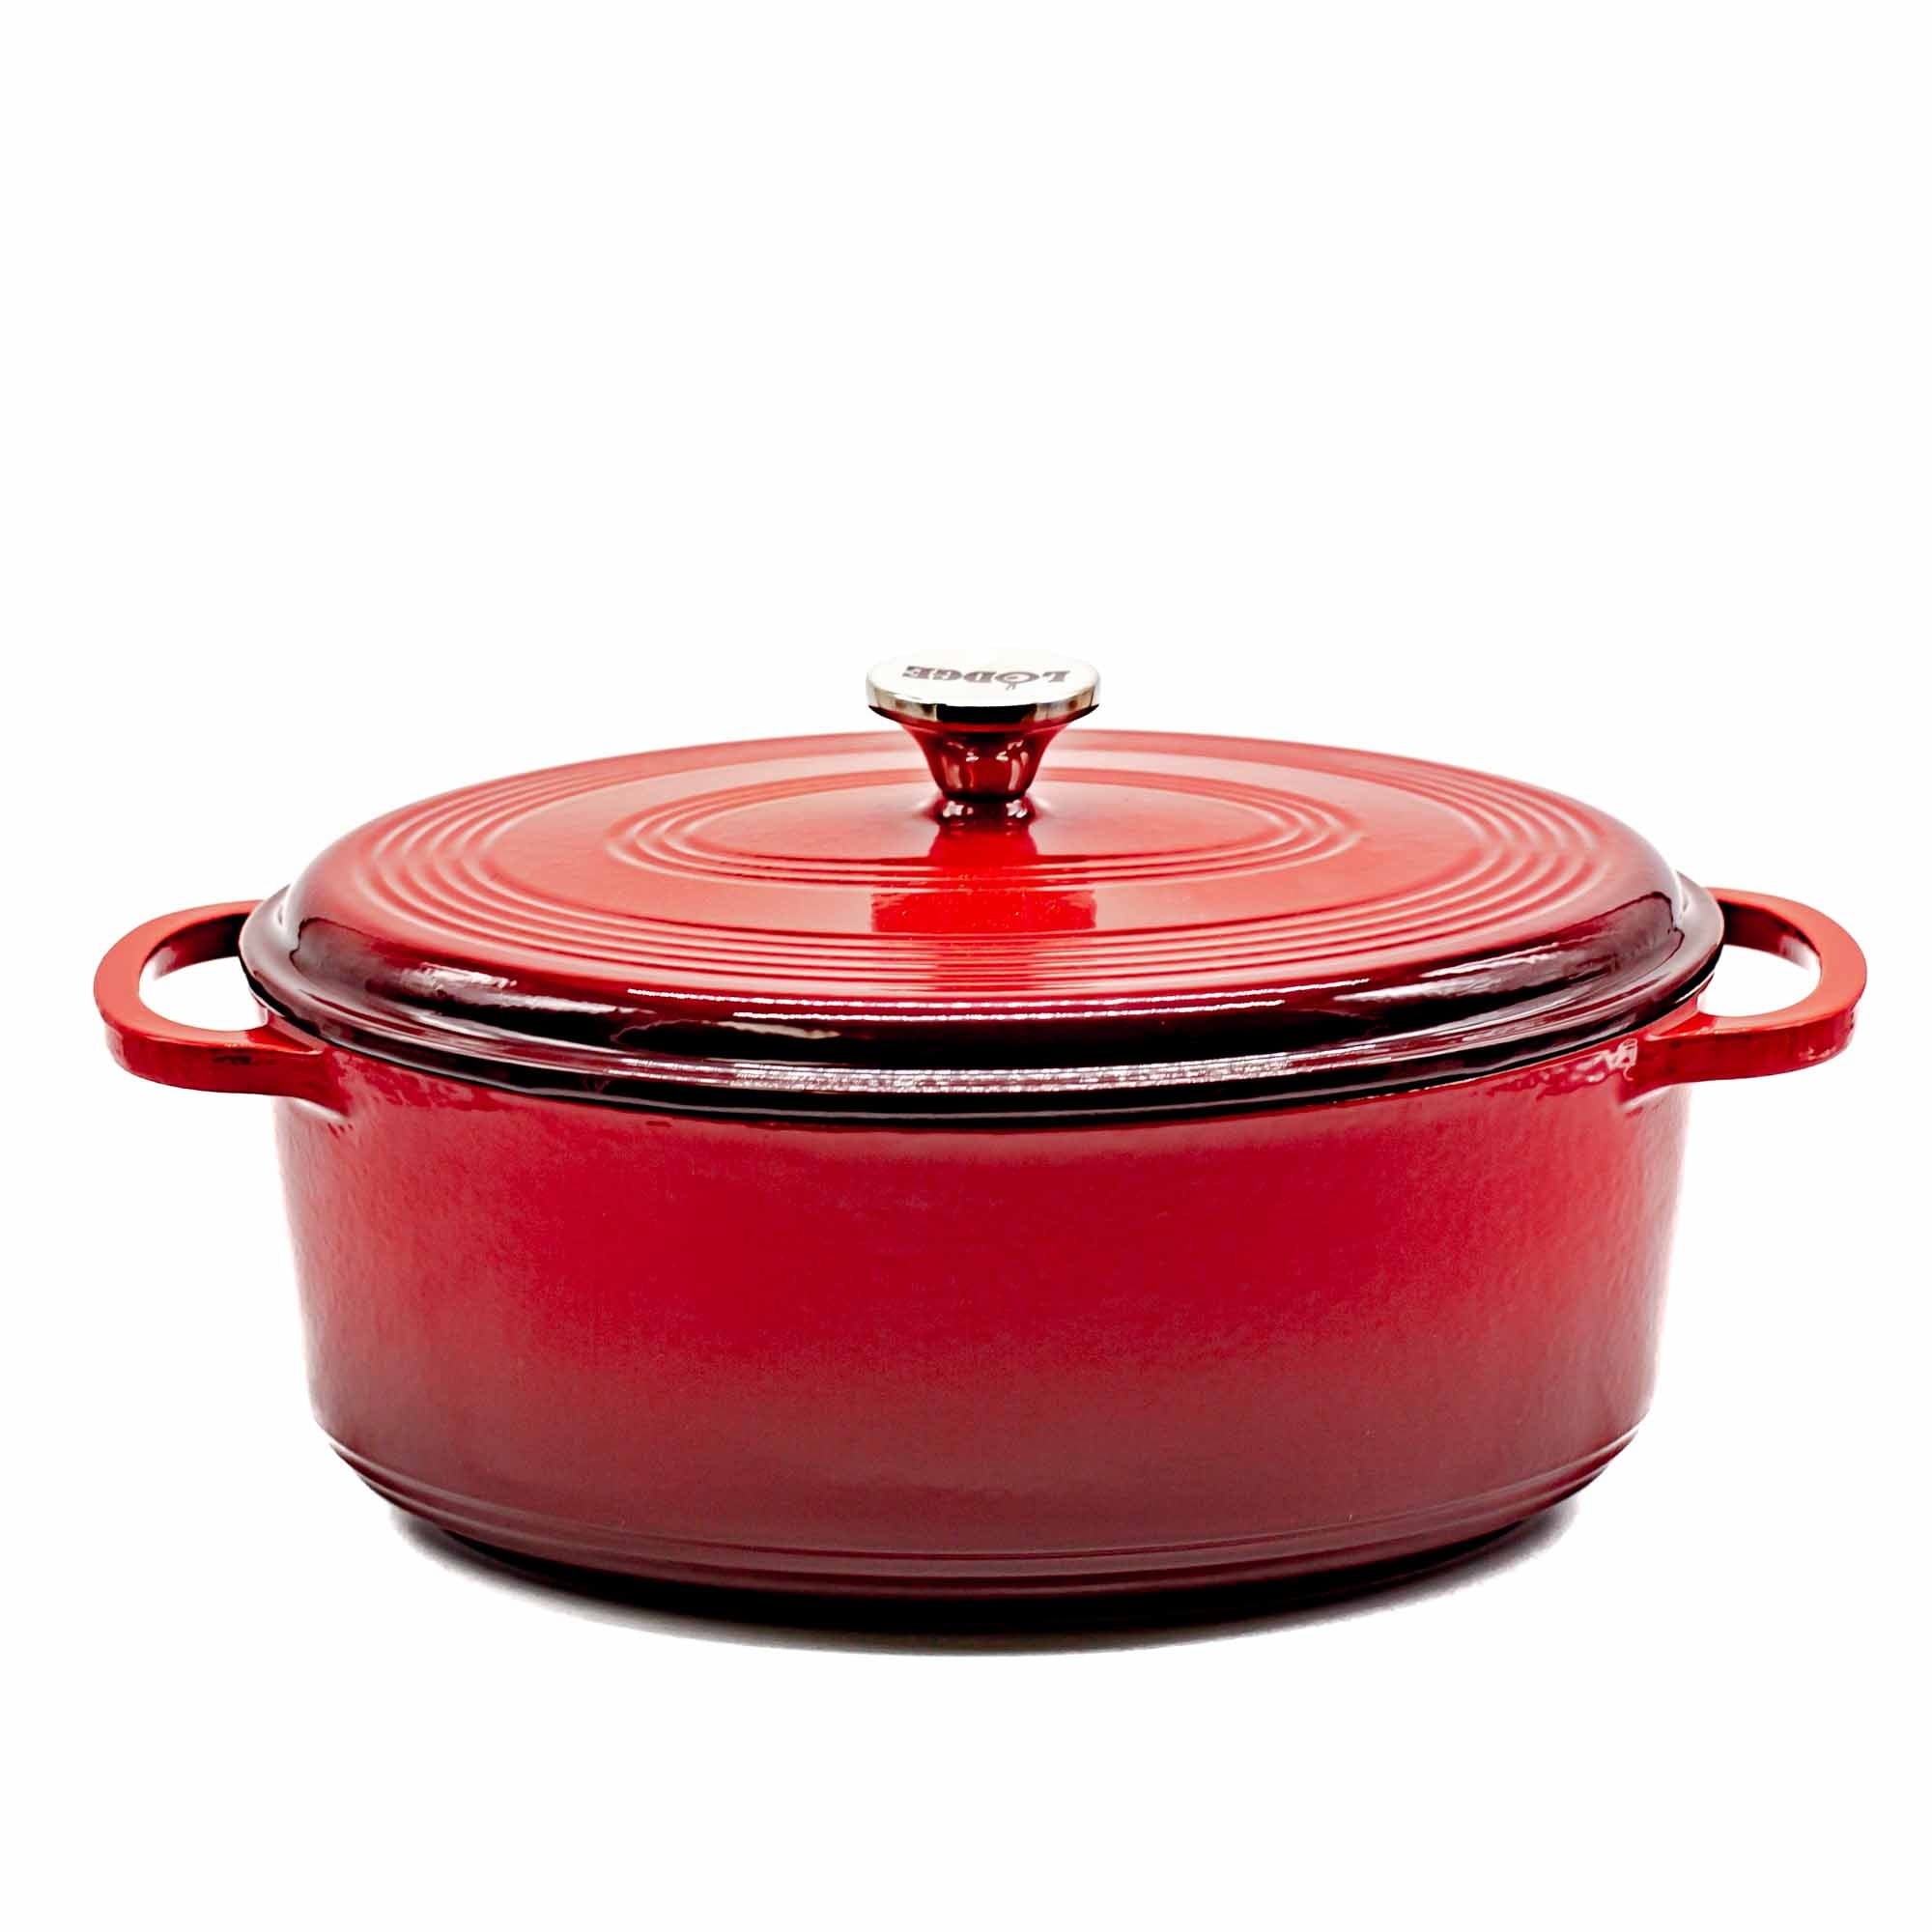 Lodge Enamel 7qt Oval Dutch Oven - 2 Colours - Mortise And Tenon